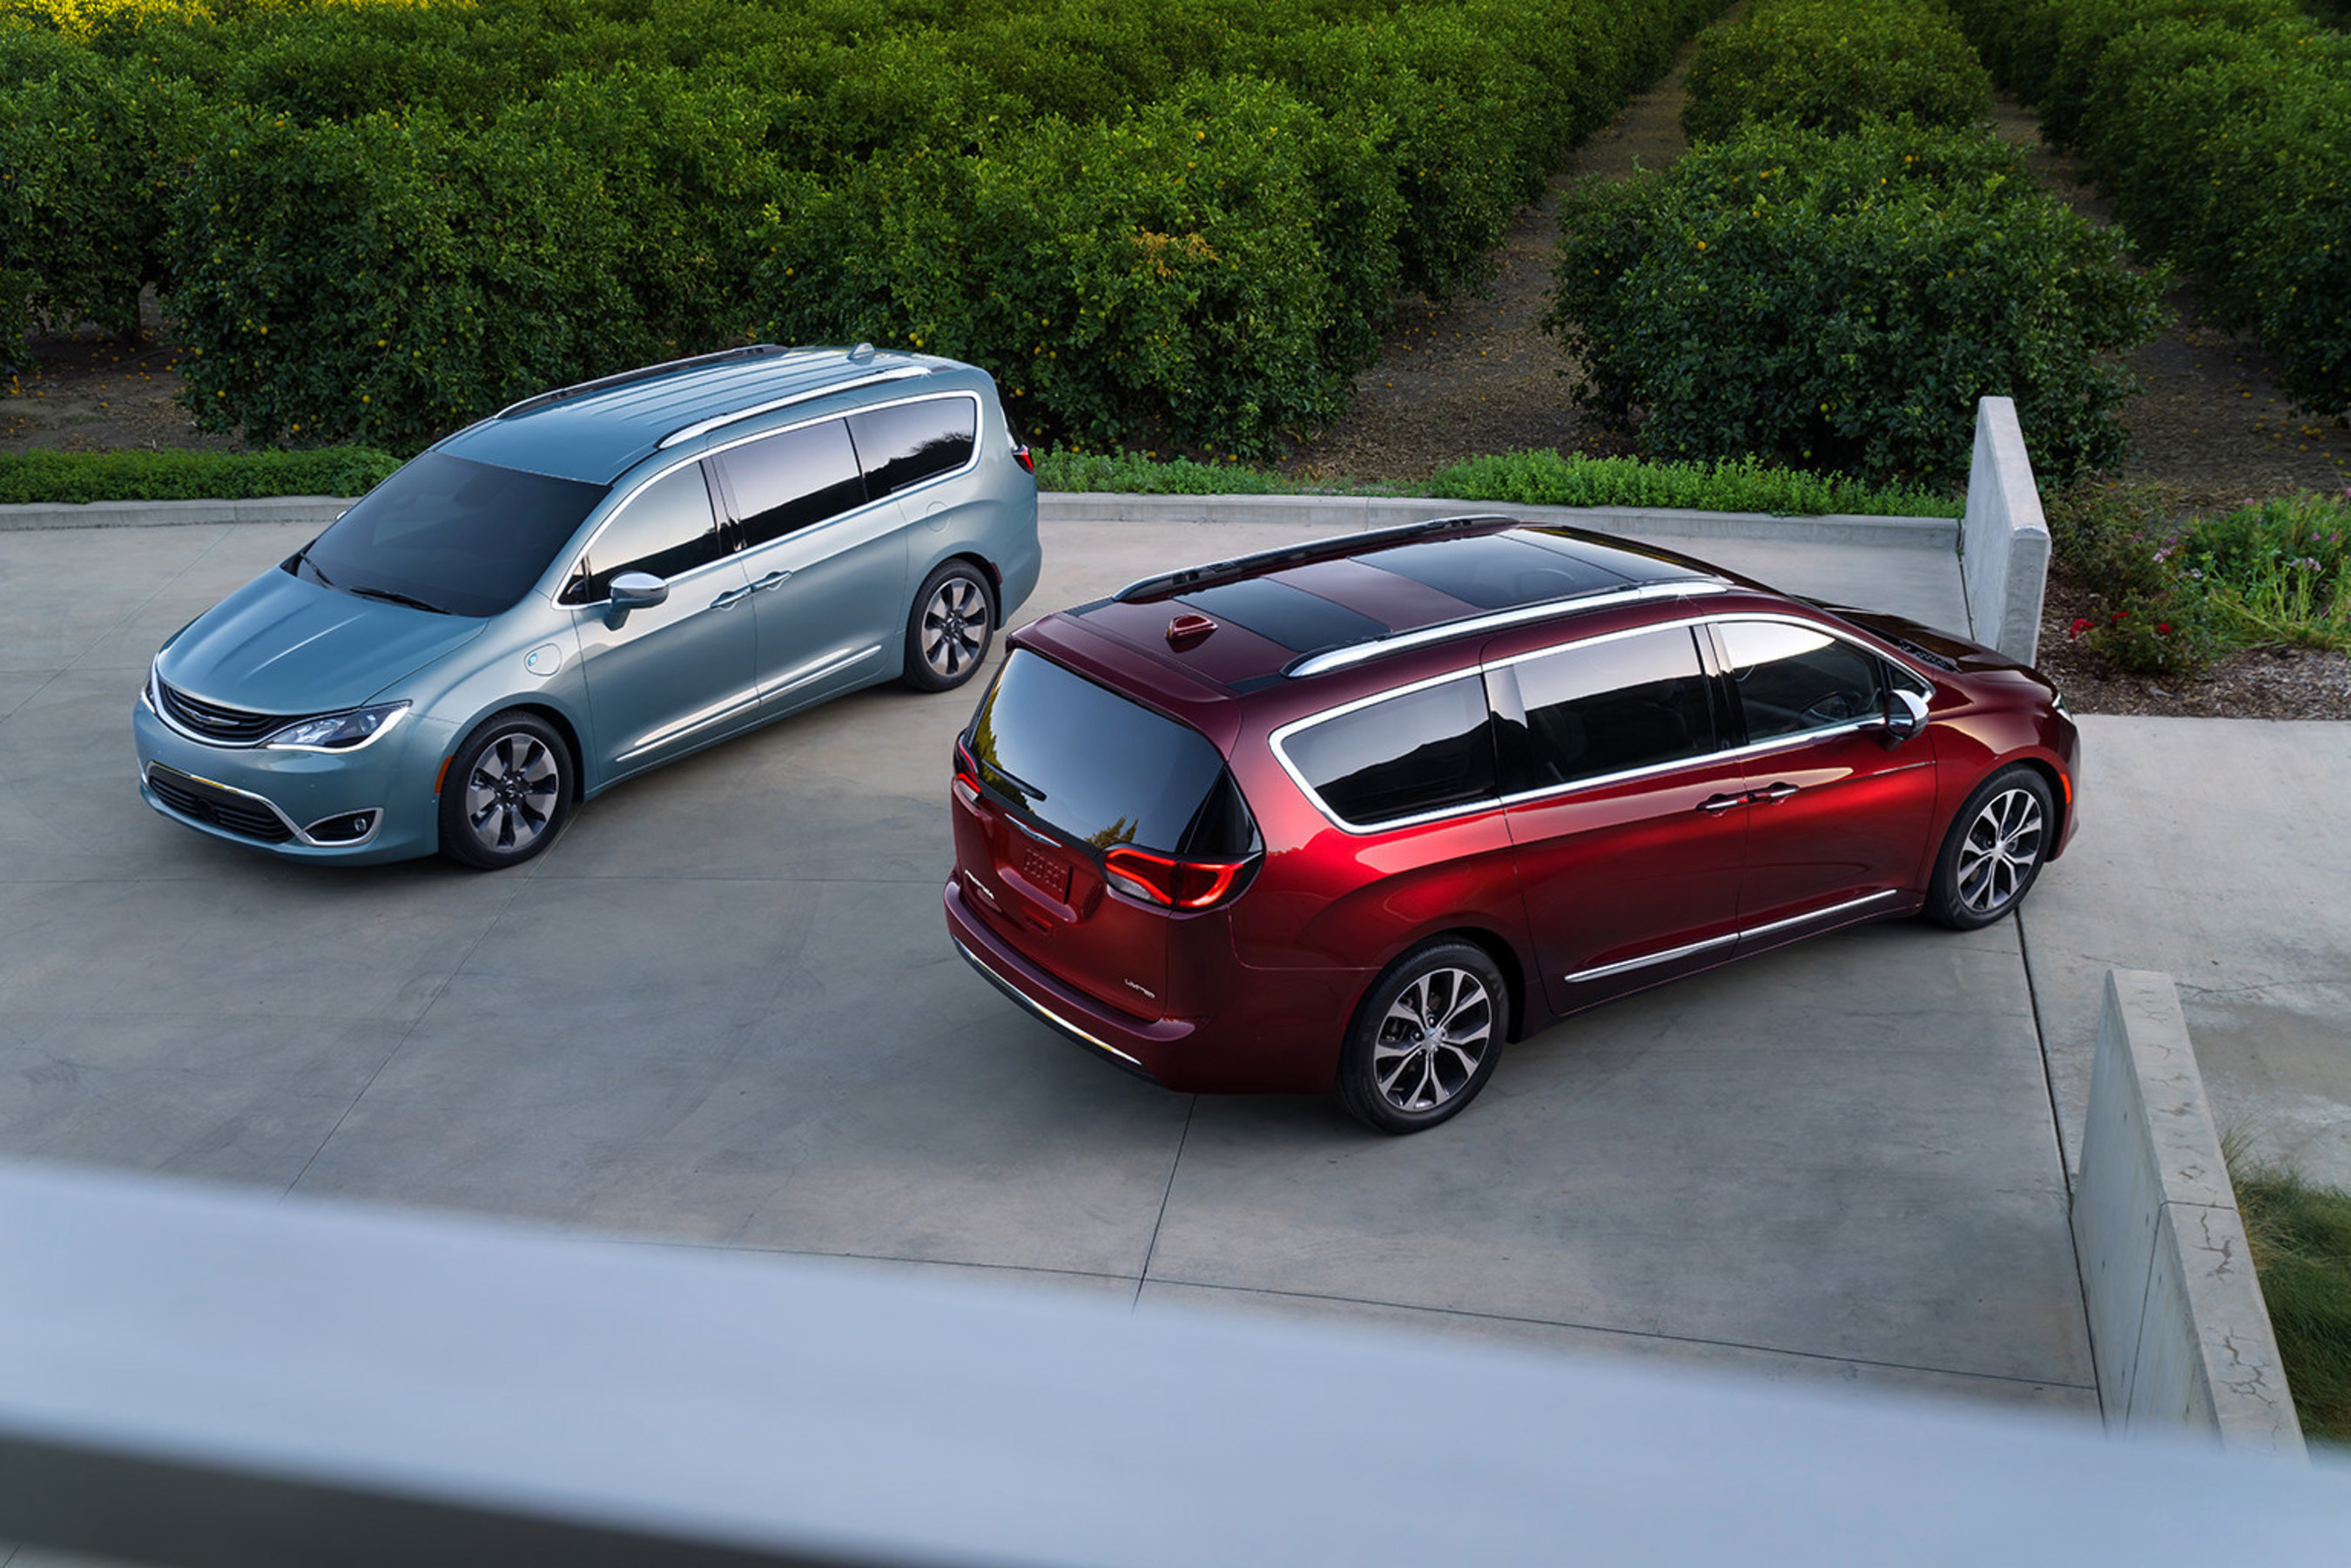 All-new 2017 Chrysler Pacifica and Pacifica Hybrid reinvent the minivan segment with an unprecedented level of functionality, versatility and technology.